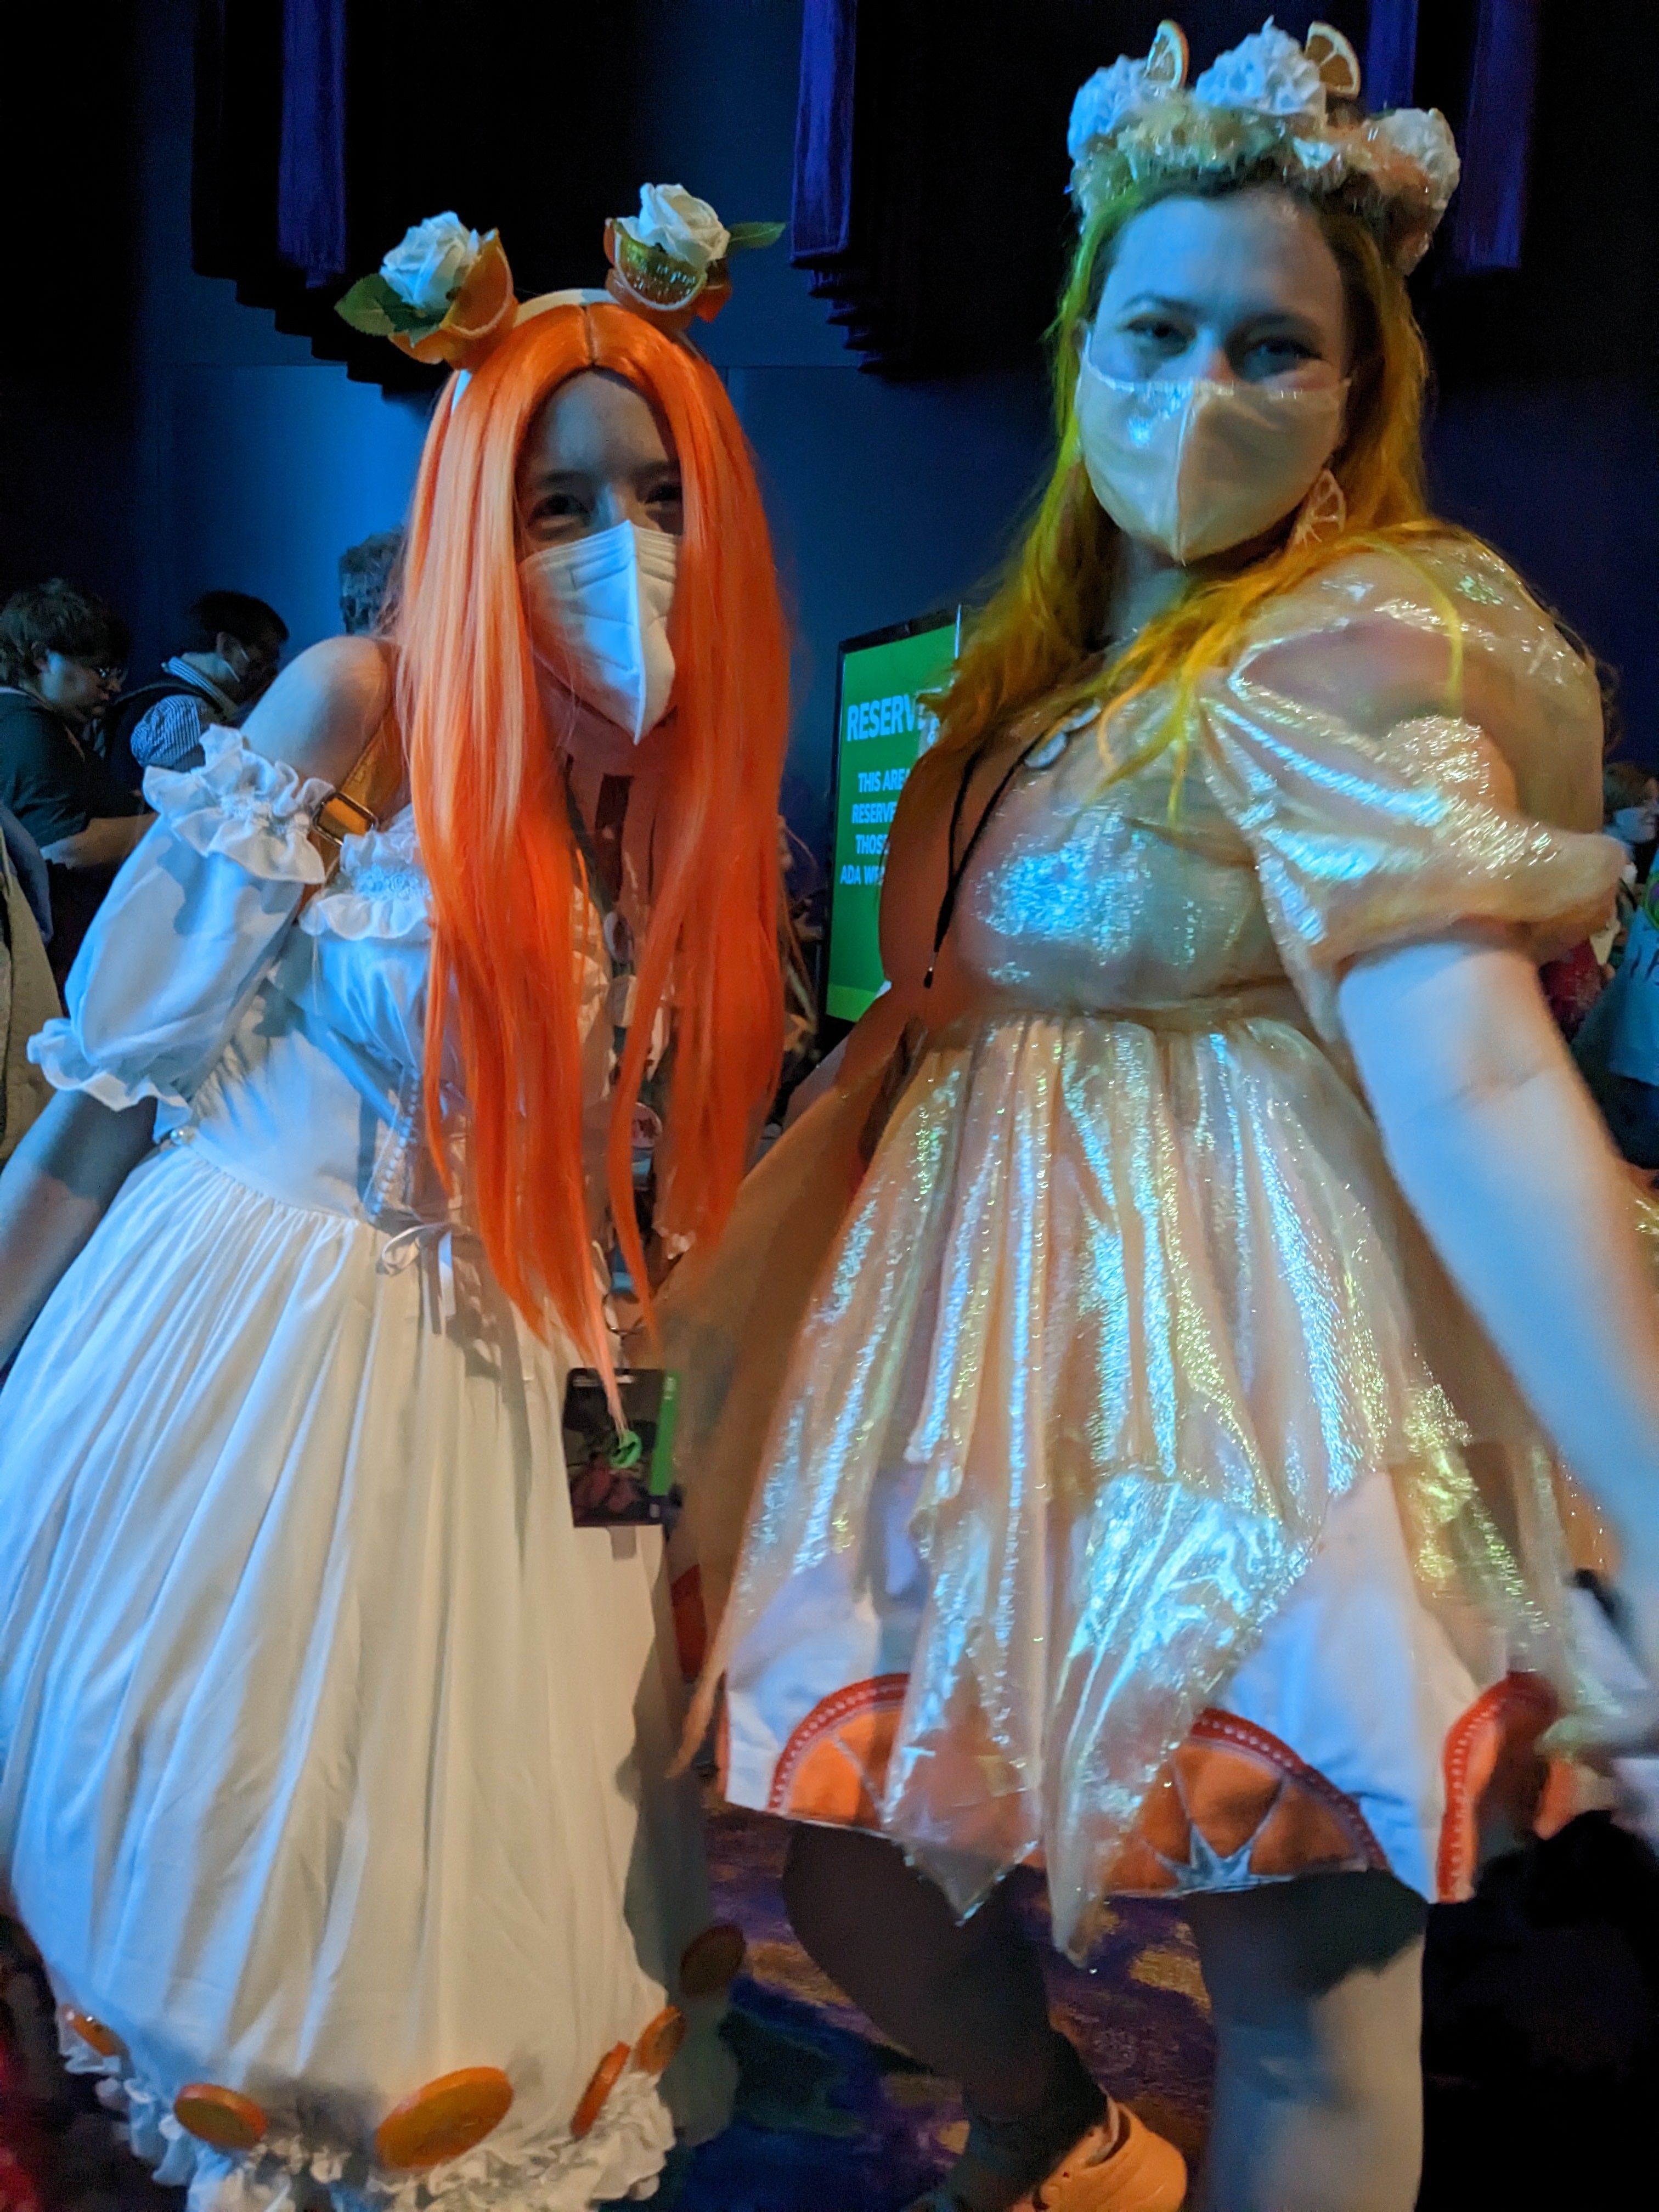 Two people wearing orange and white dresses